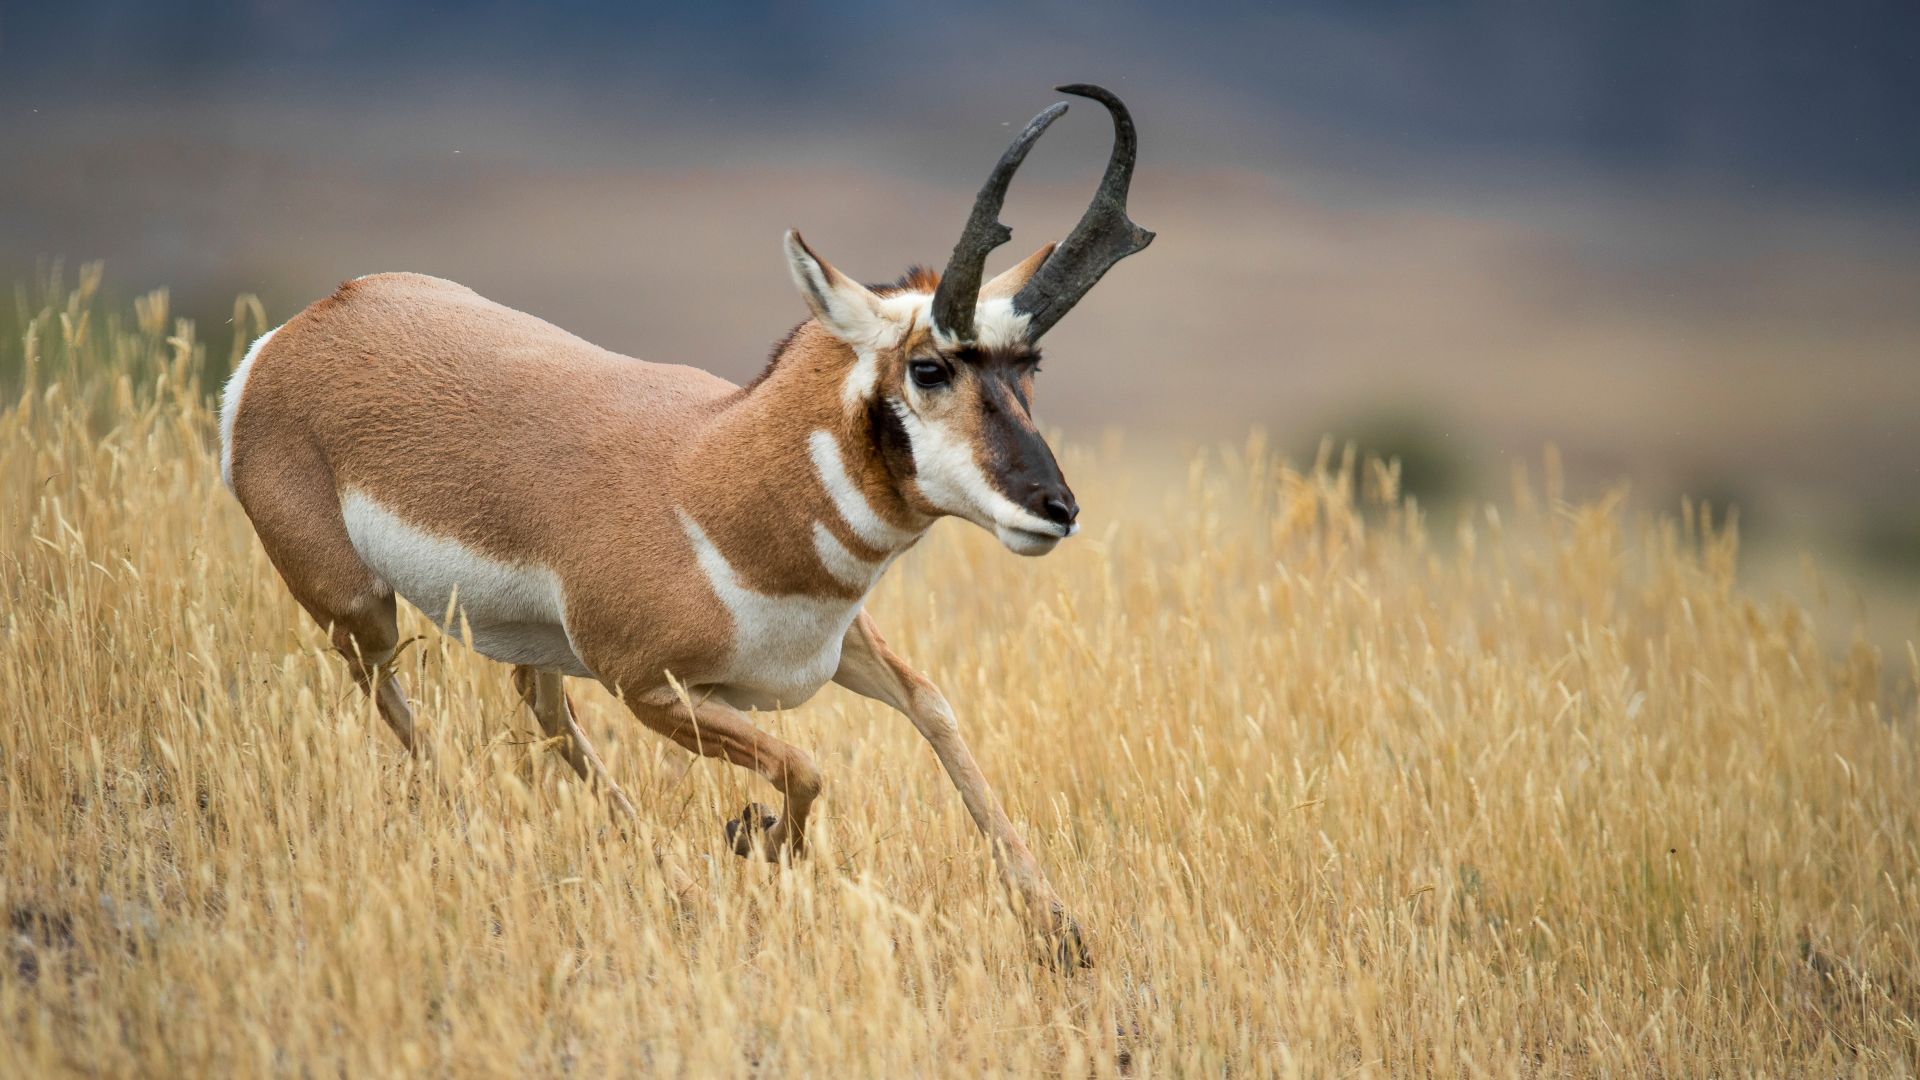 <p>                     Though they’re often referred to as antelope, an assignment perhaps mistakenly assigned by Lewis and Clark, pronghorn is actually the sole surviving member of the ruminant family that evolved in North America over 20 million years. They do have a deer-like body, but are distinctive due to their white rump and underbelly, large eyes and long curved horns which they shed annually. There are about 500 of them in Yellowstone, found in Lamar Valley in the summer and between the North Entrance and Reese Creek in the winter.                   </p>